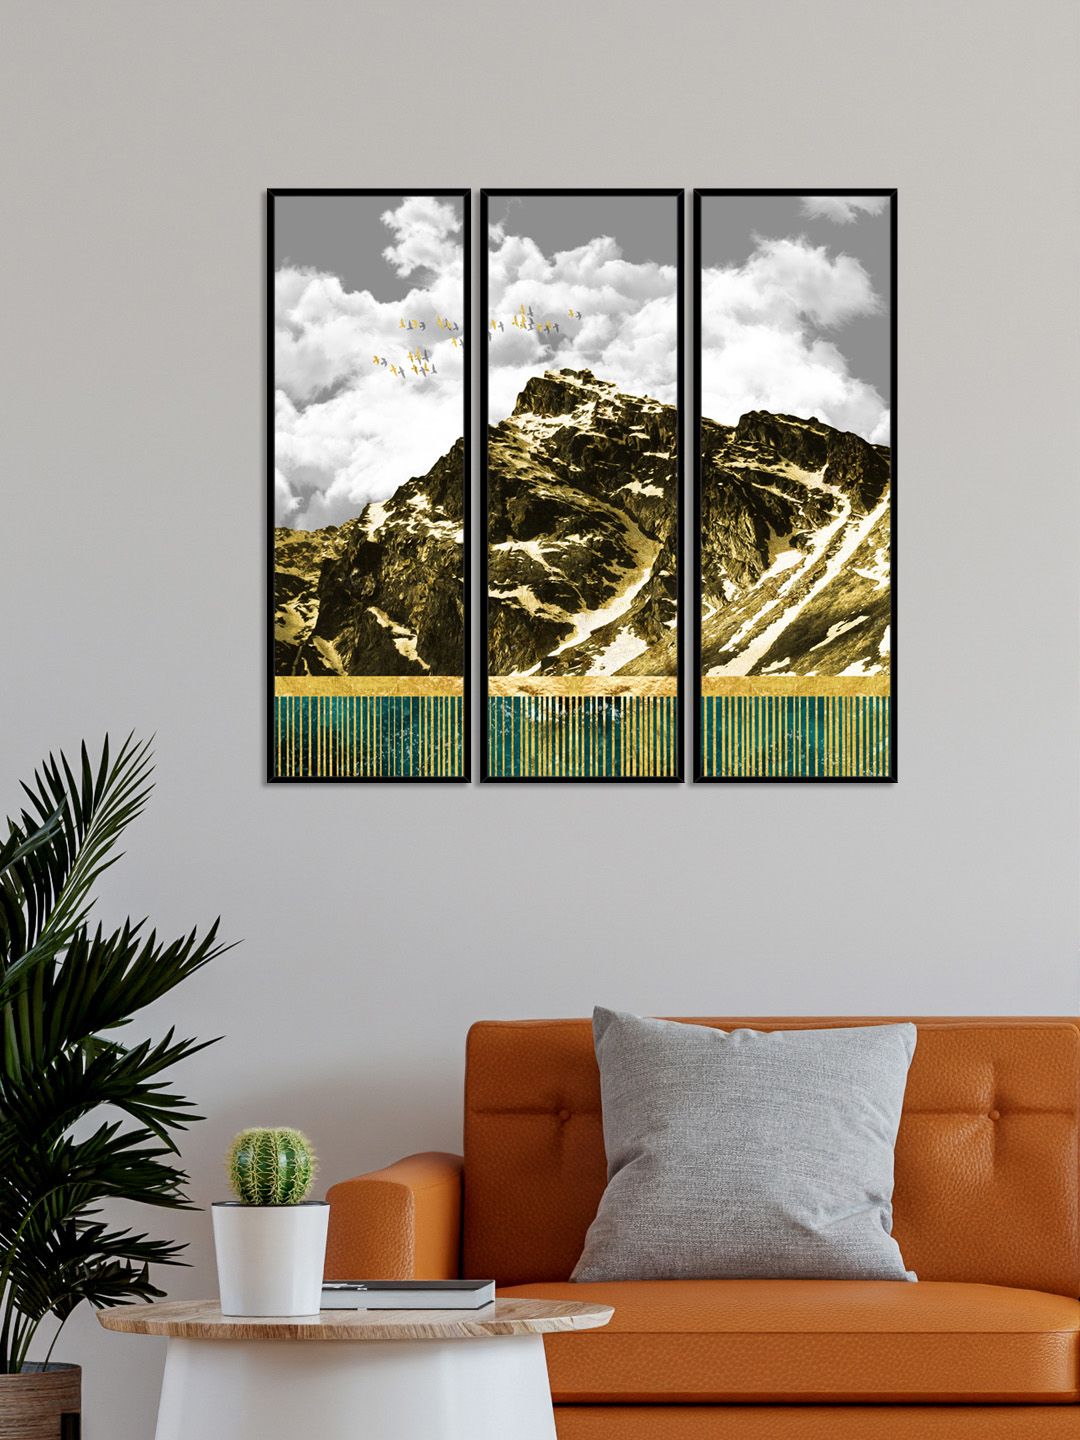 999Store Set Of 3 Mountain Views With Birds Wall Paintings Price in India